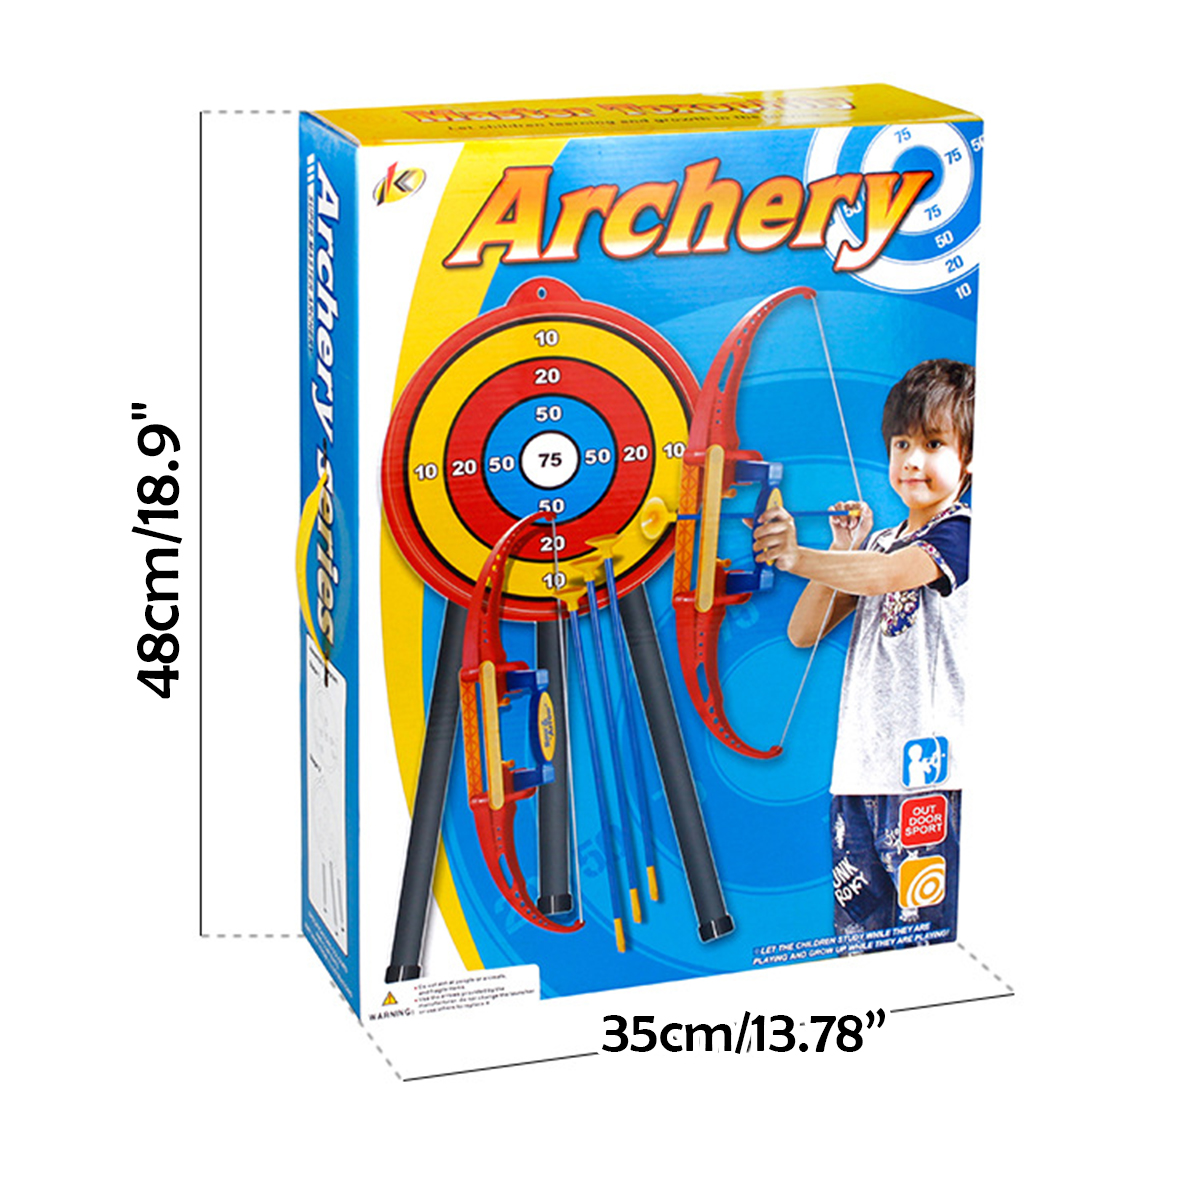 Classic-Archery-Shoot-Game-Set-Develop-Skill-Novelties-Toys-for-Young-Kids-1690766-12